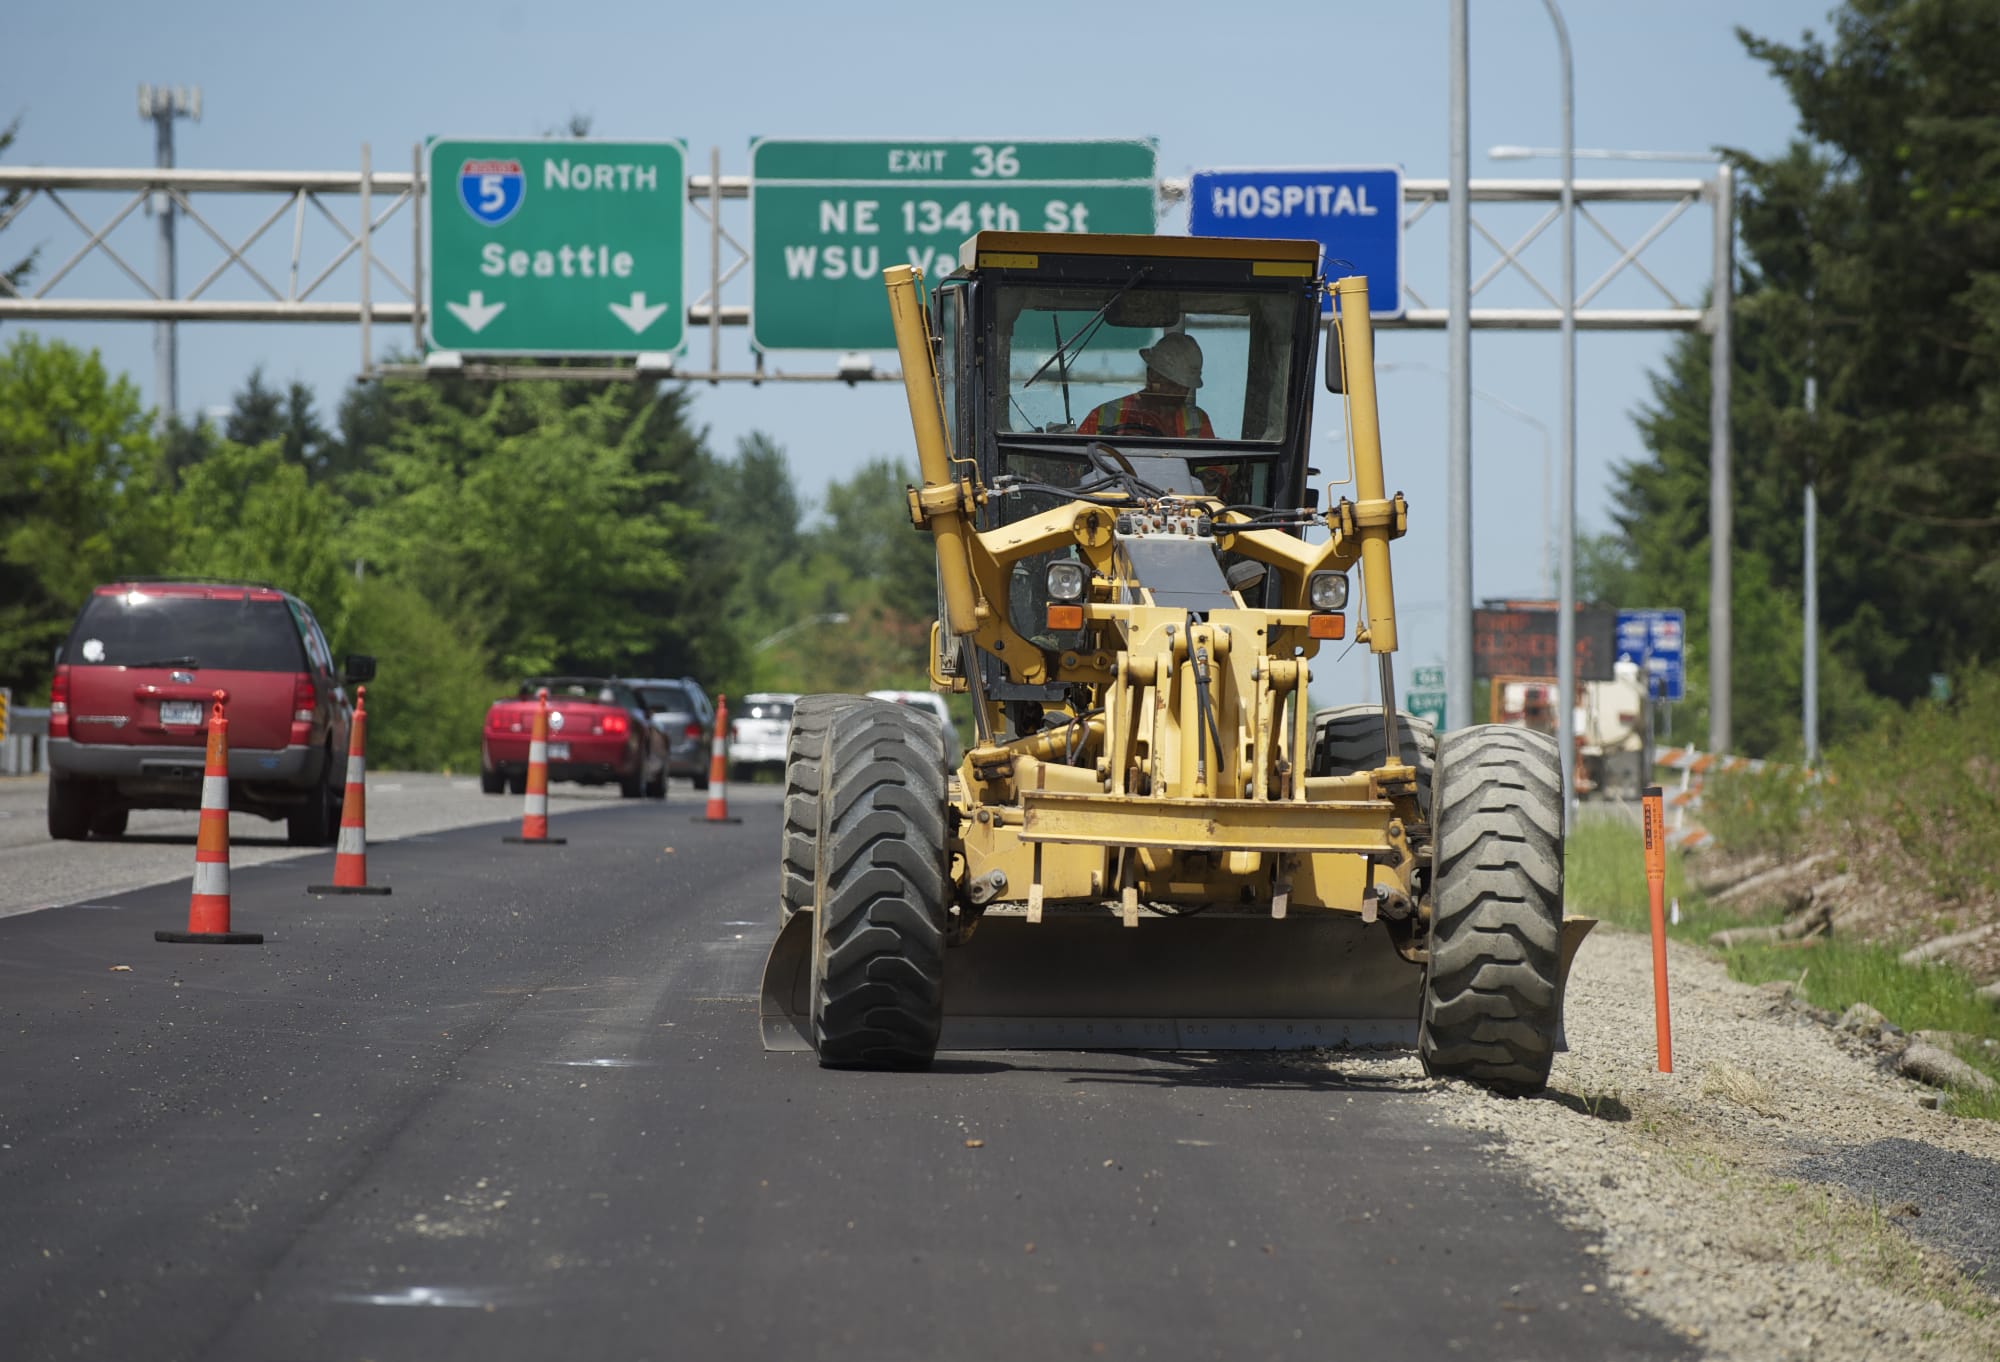 A grader driver on Monday puts the finishing touches on a new exit lane at the Northeast 134th Street exit off northbound Interstate 205. The lane is expected to open at 6 a.m.